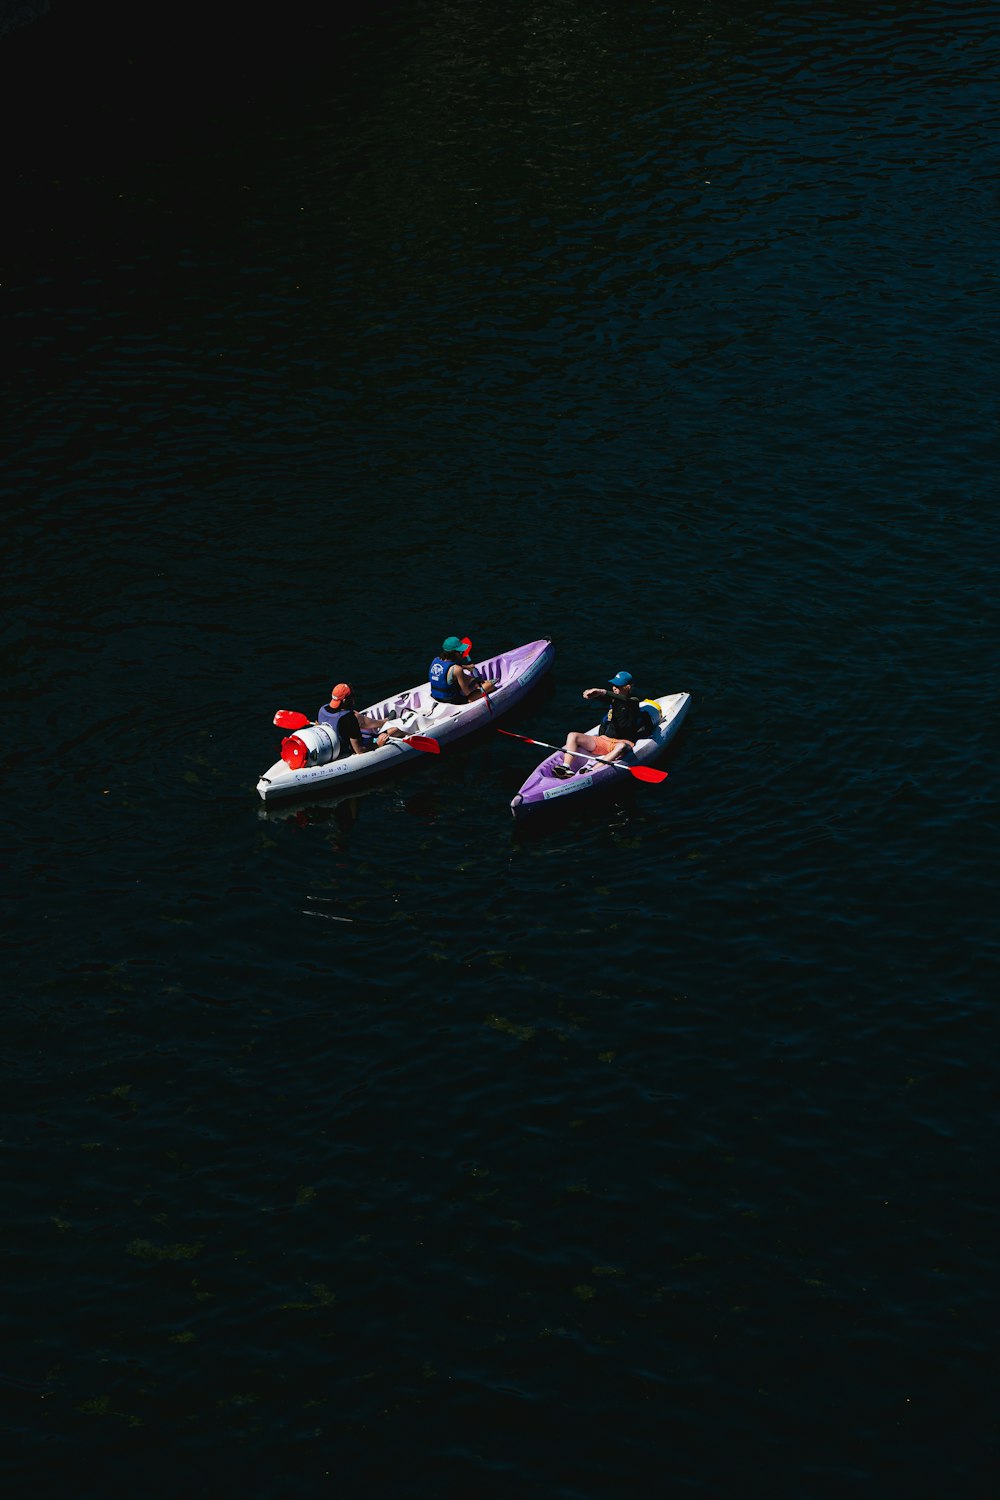 2 people riding on white and red kayak on body of water during daytime